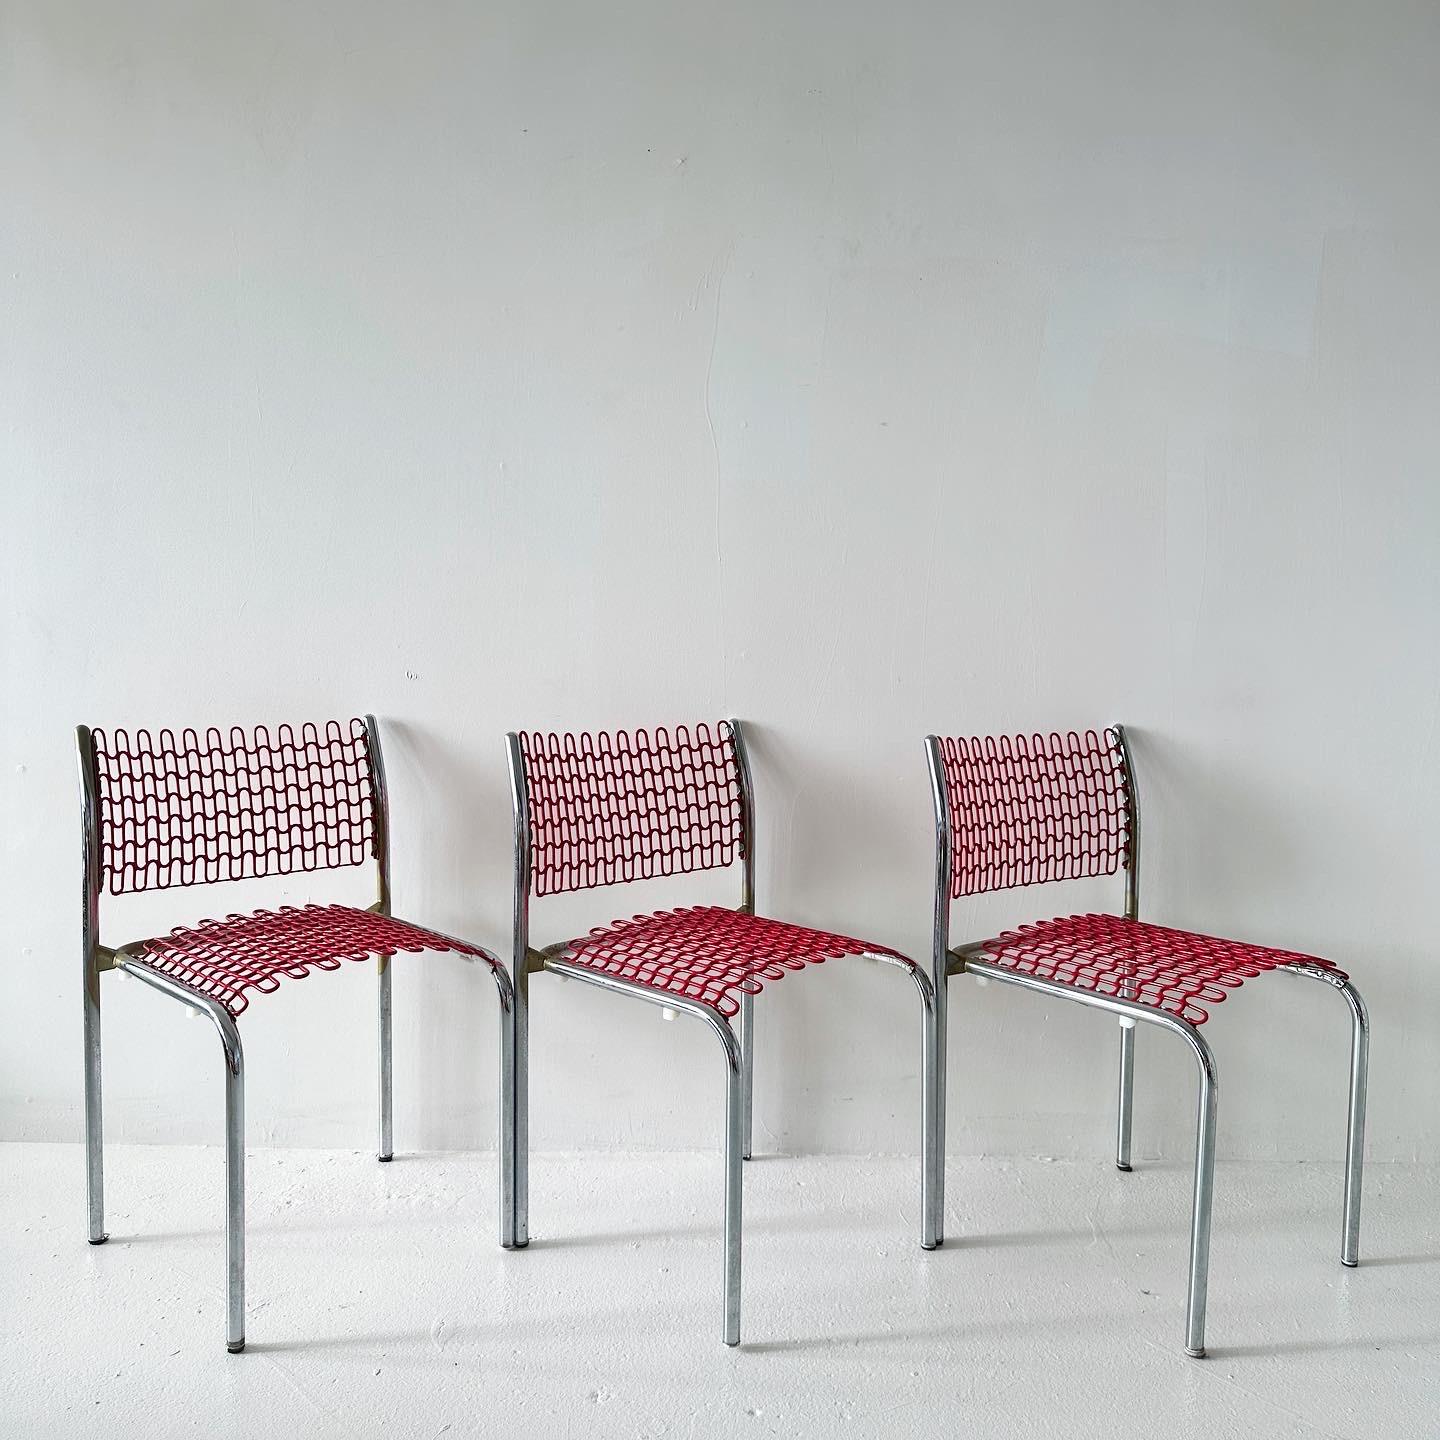 American Red Sof Tech Chairs by David Rowland for Thonet (set of 4) (8 available) For Sale